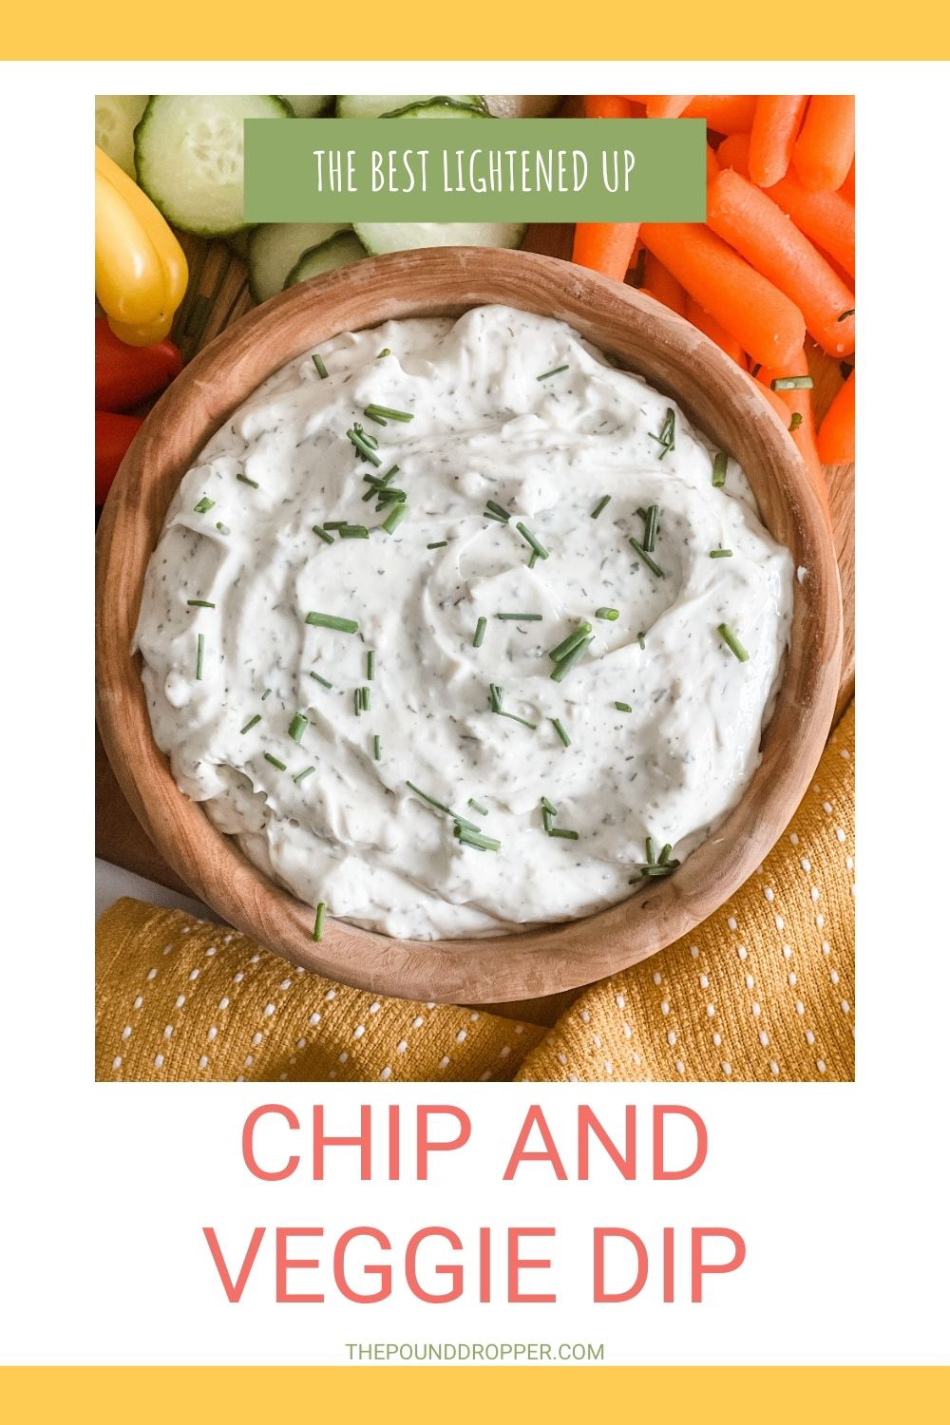 This is the Best Lightened Up Chip and Veggie Dip! Pair it with chips or cut-up veggies! Requires only 4 ingredients and takes 5 minutes to make! via @pounddropper